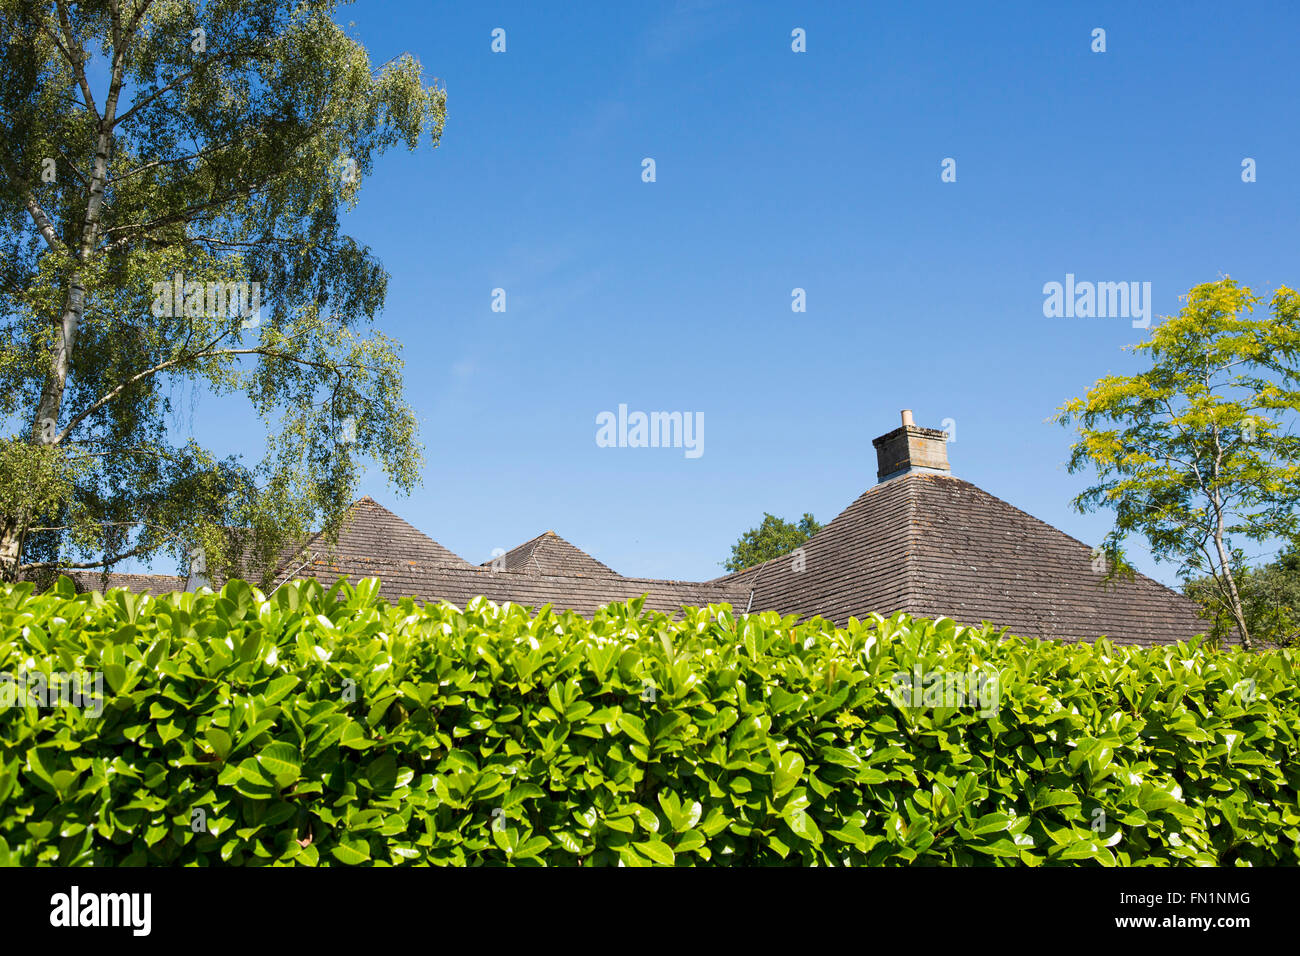 The roof of a large house half hidden behind a dry stone wall and large green leafy hedge. Stock Photo